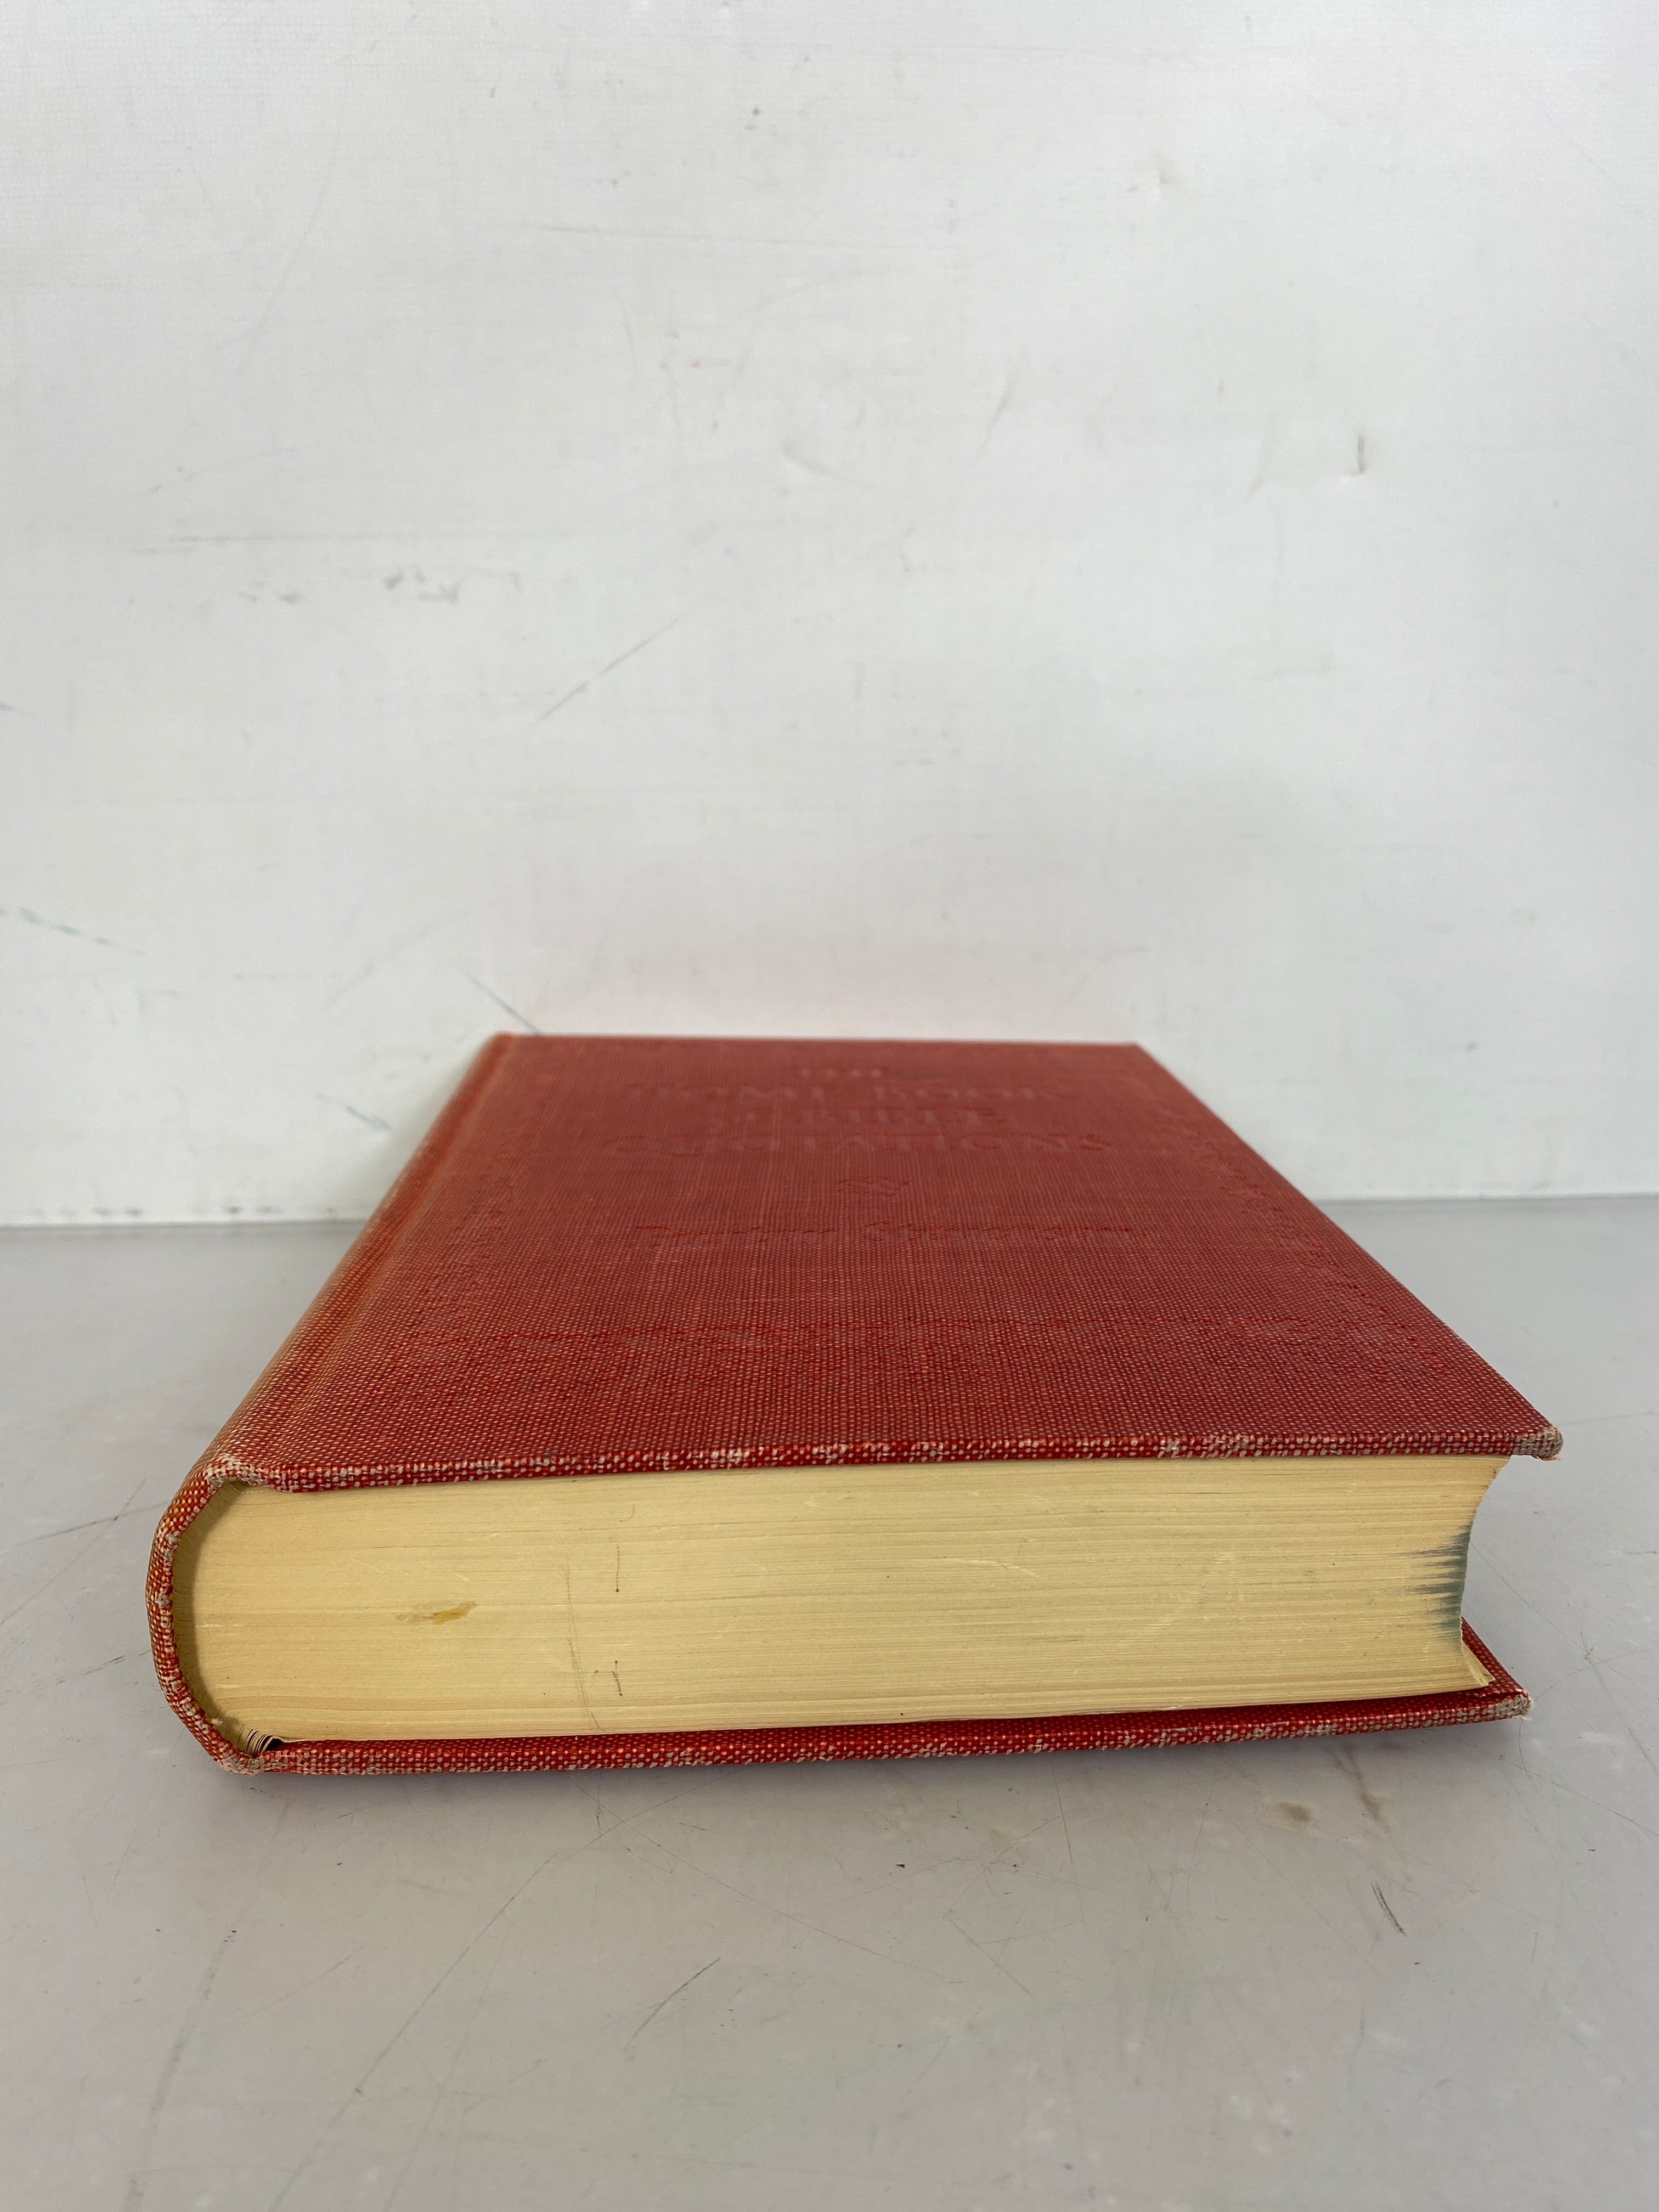 The Home Book of Bible Quotations by Burton Stevenson 1949 Vintage HC